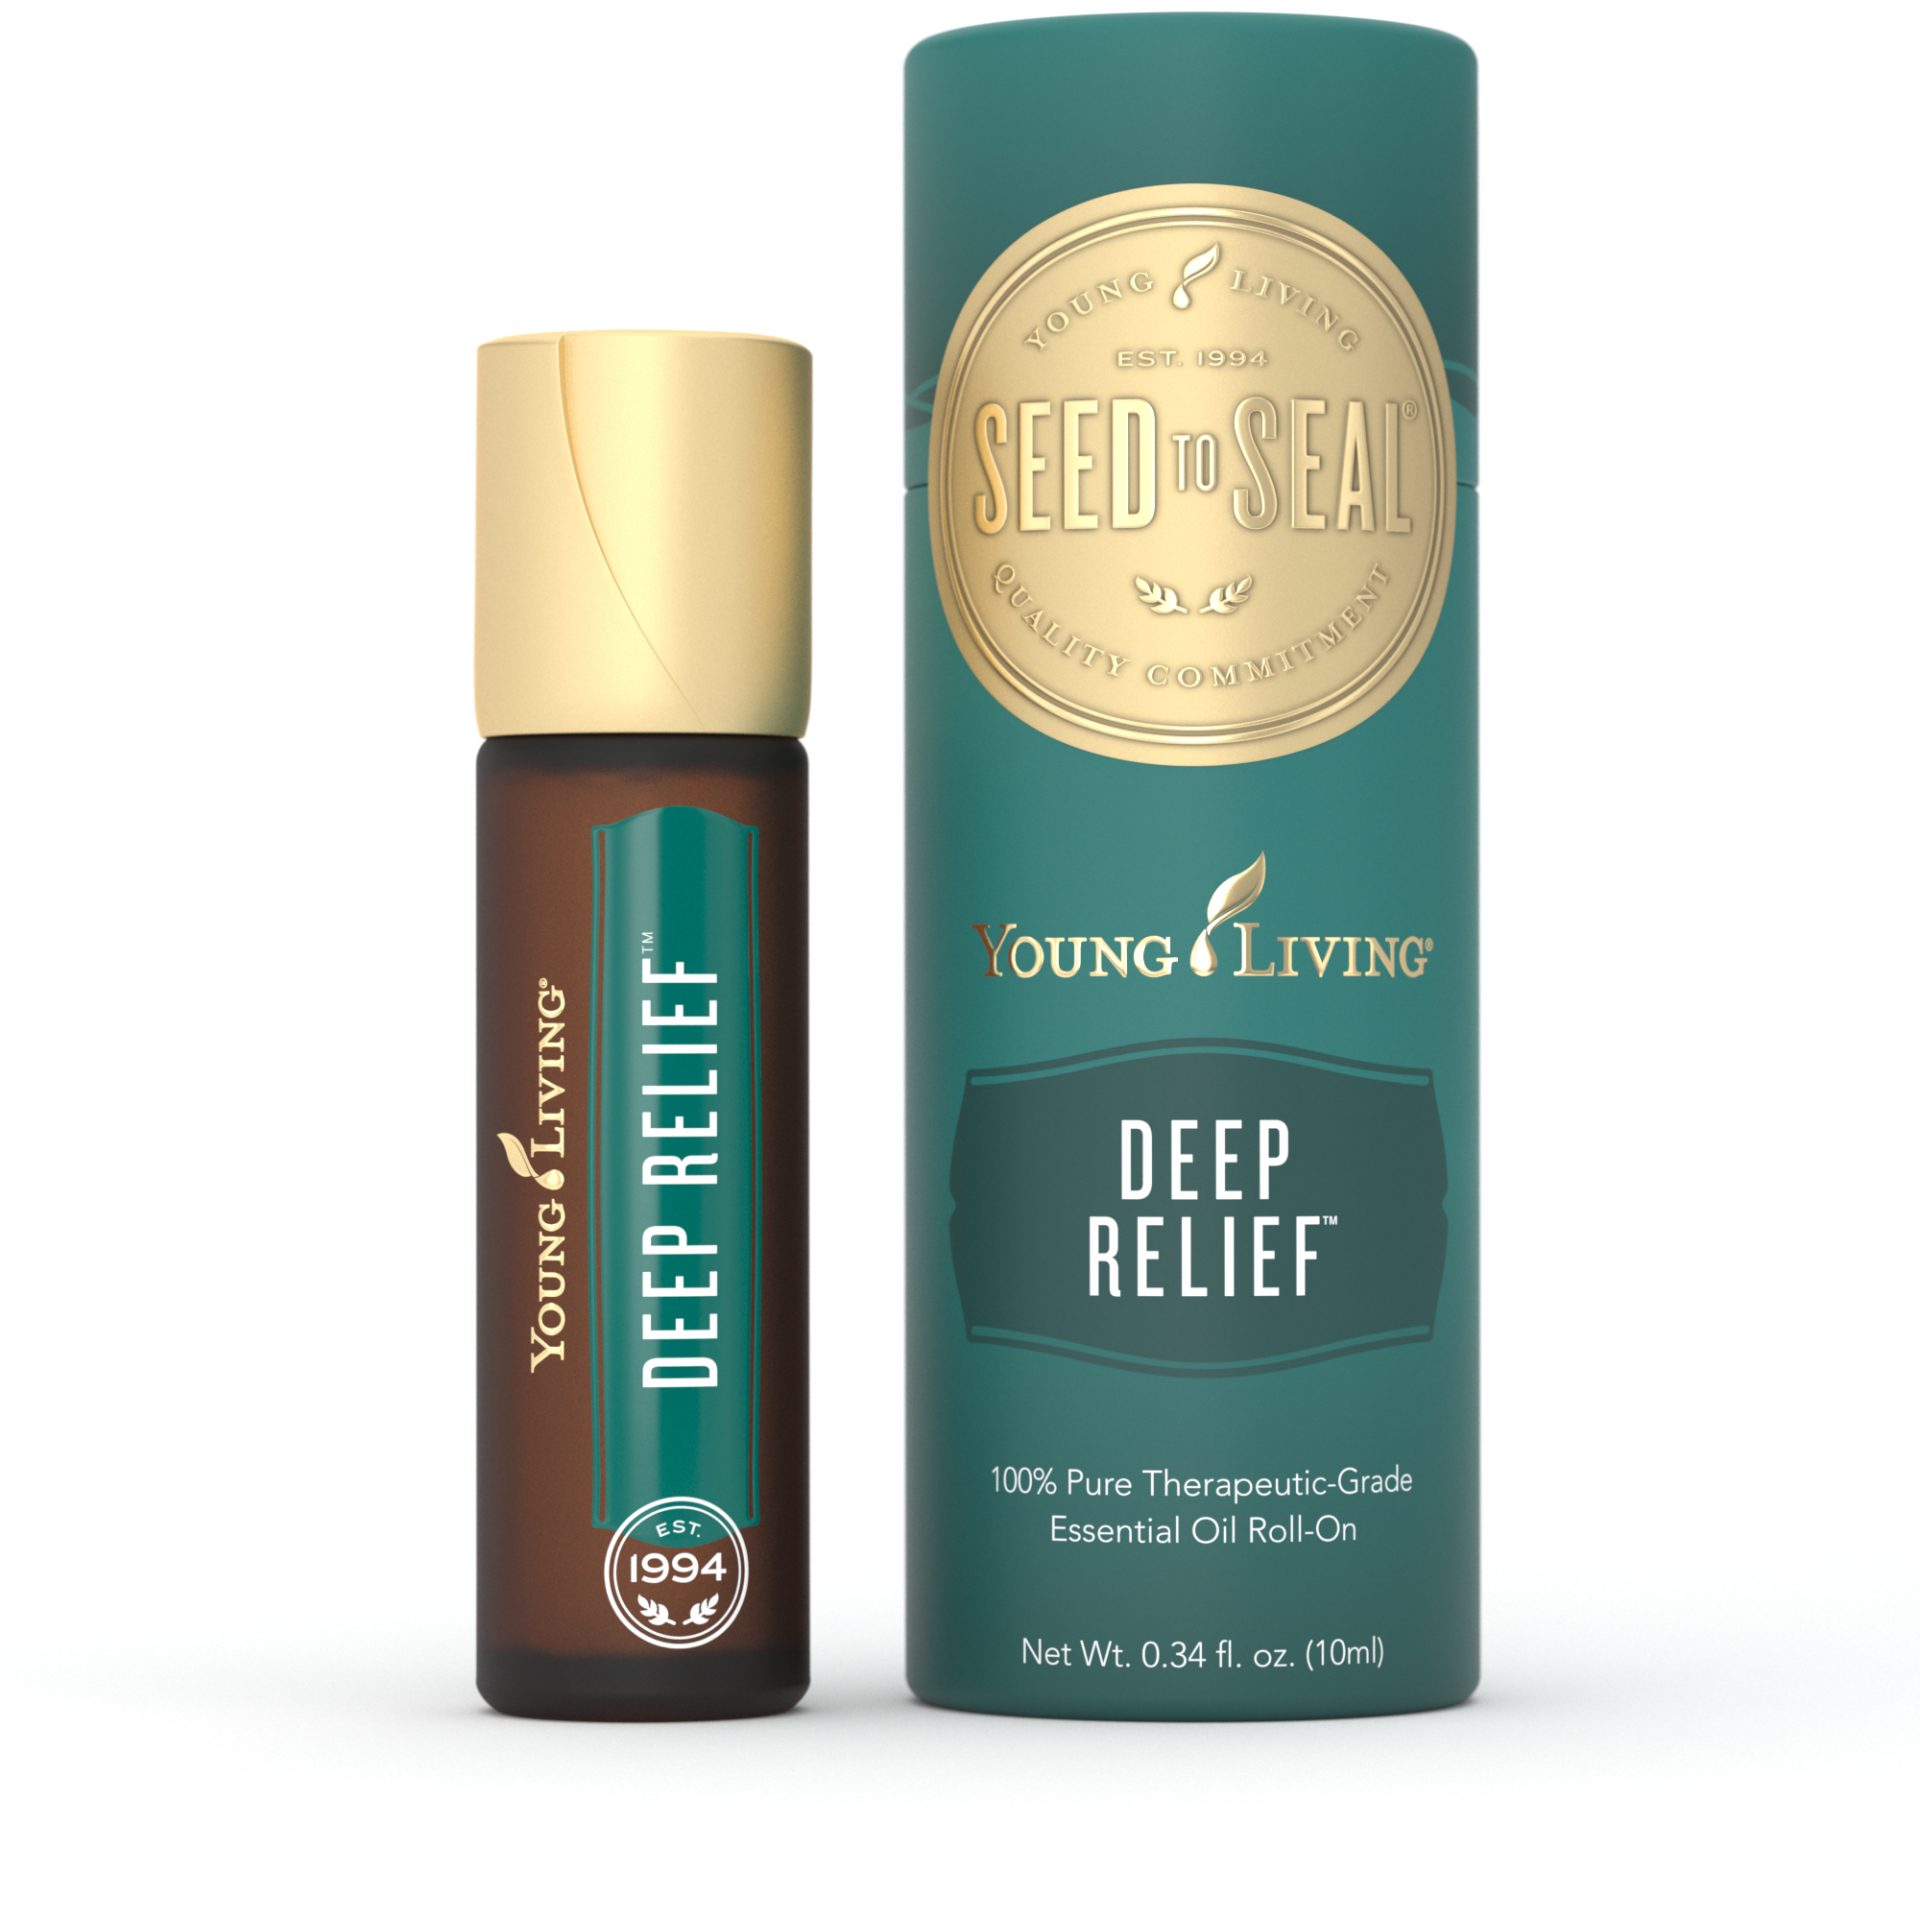 10 ml bottle of deep relief roll on with outer packaging 